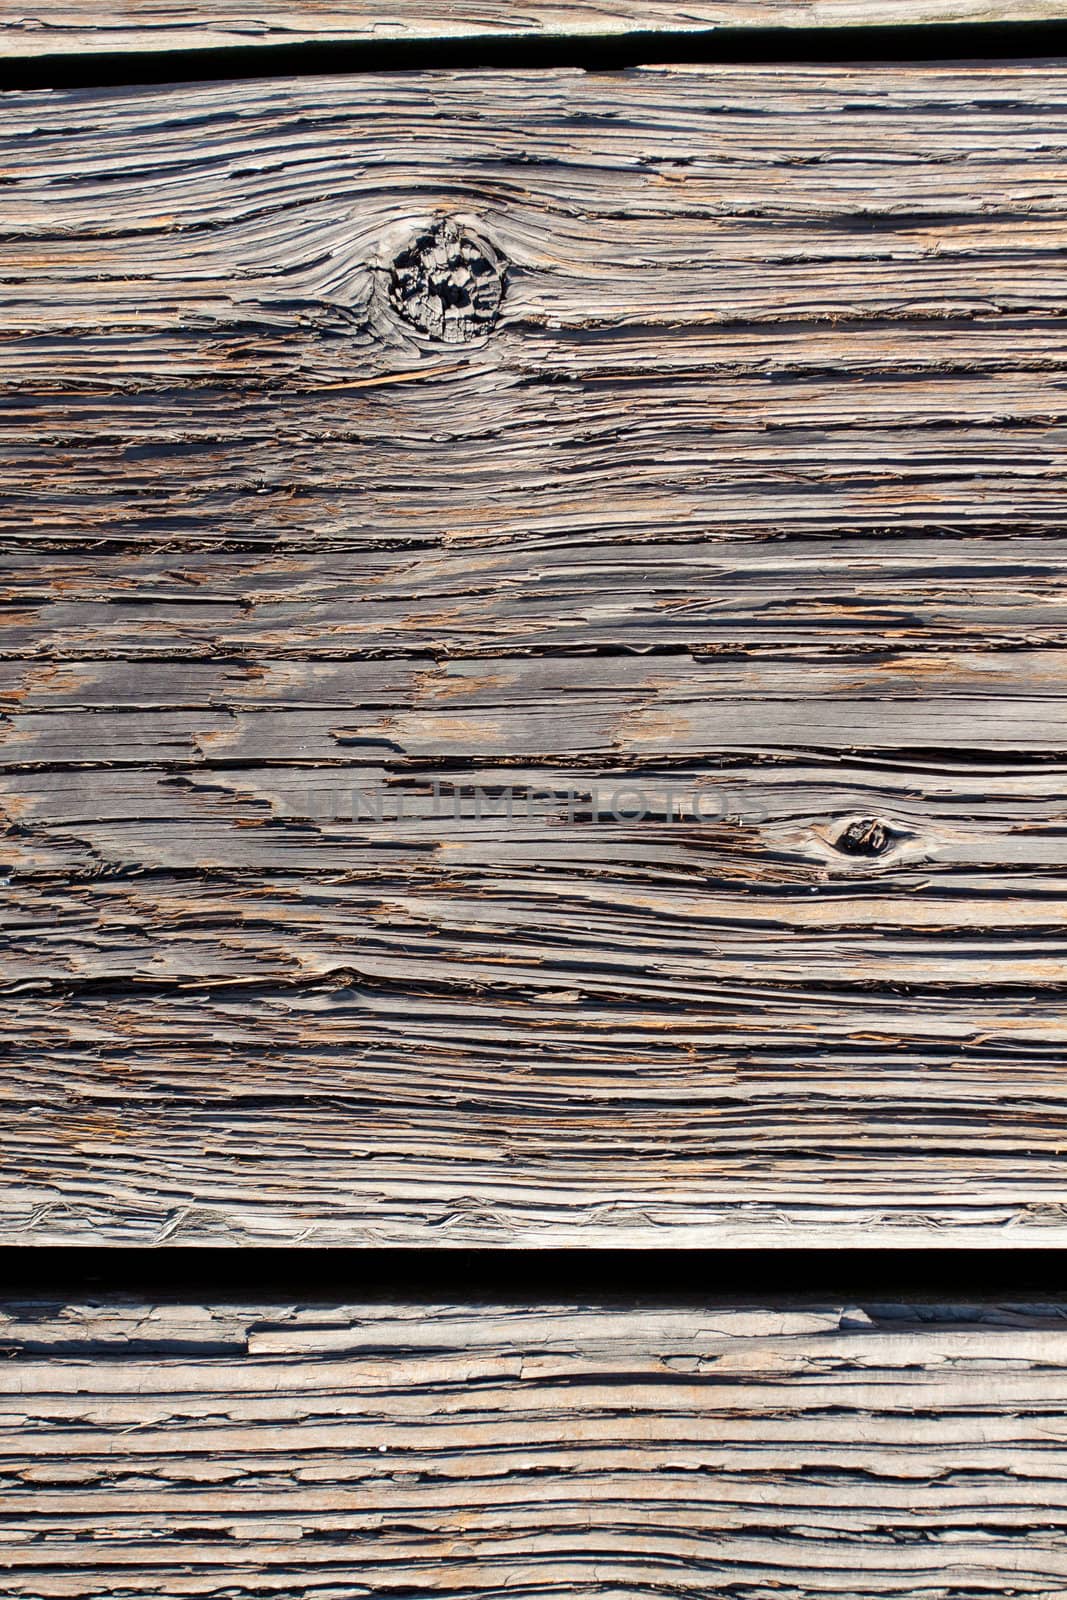 Wood boards are photographed at a dock to create some individual abstract images of the texture of wood after being weathered for many years.